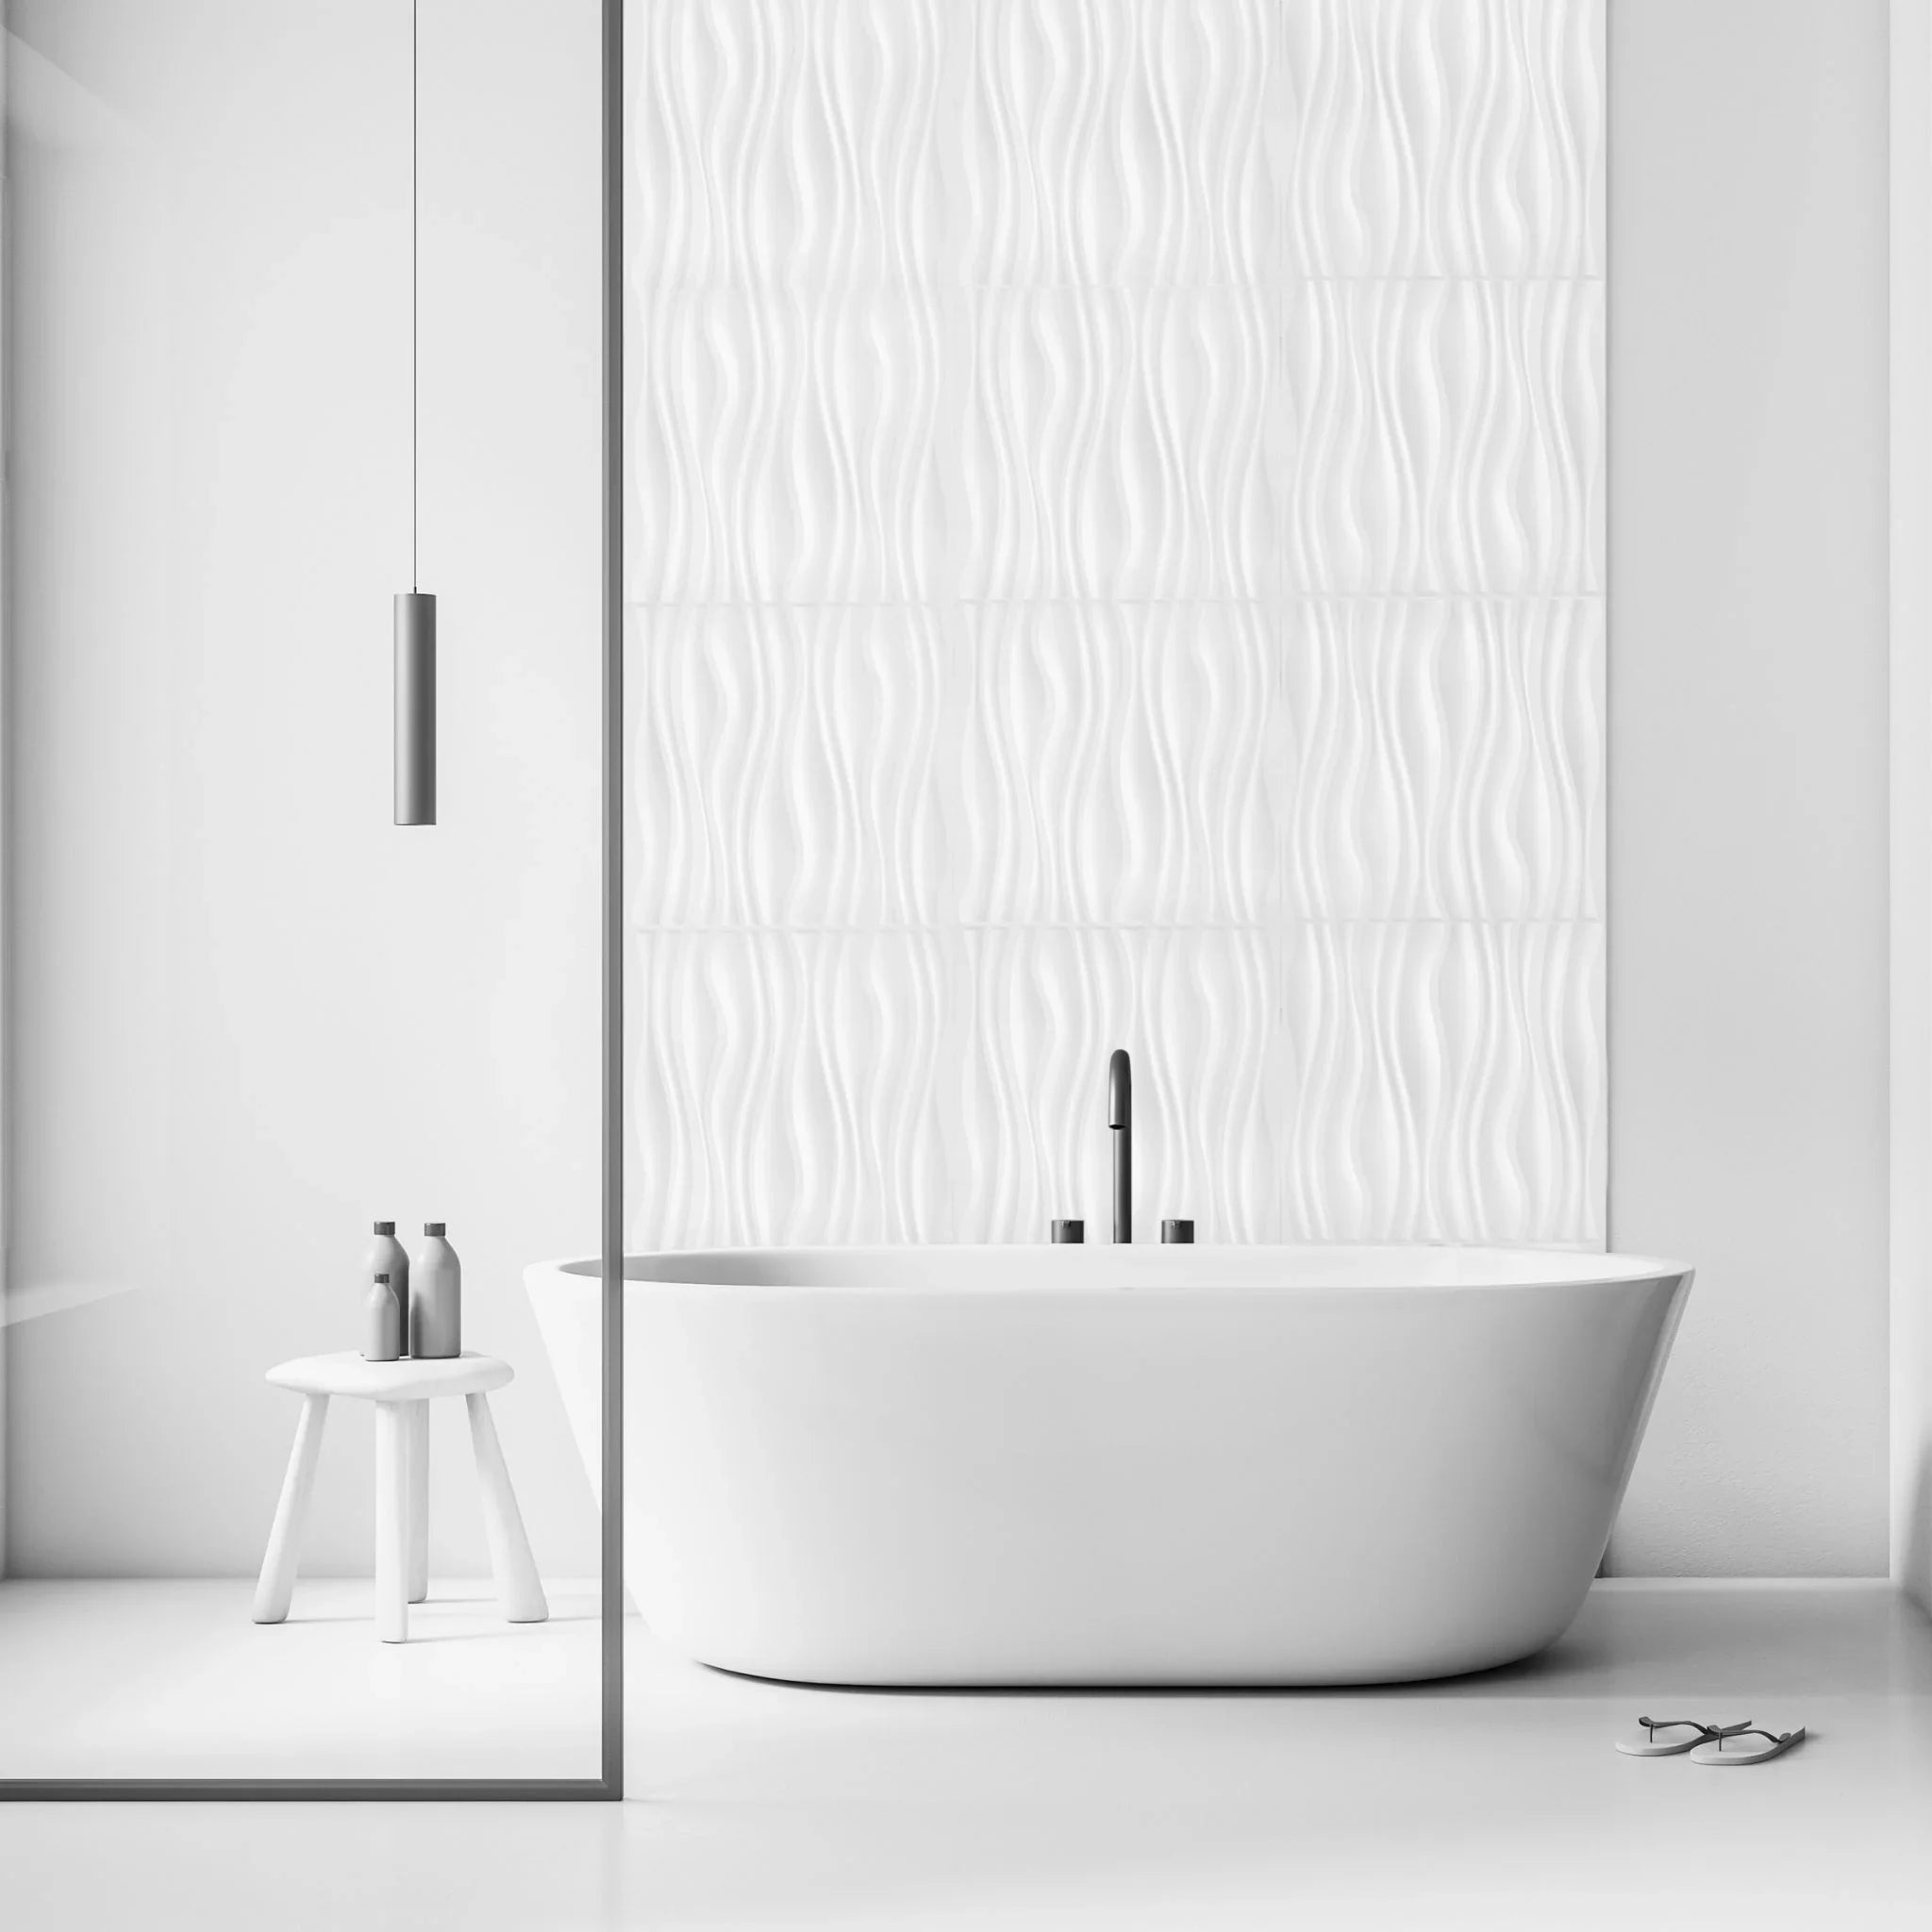 White PVC wall panel with wavy patterns in modern bathroom